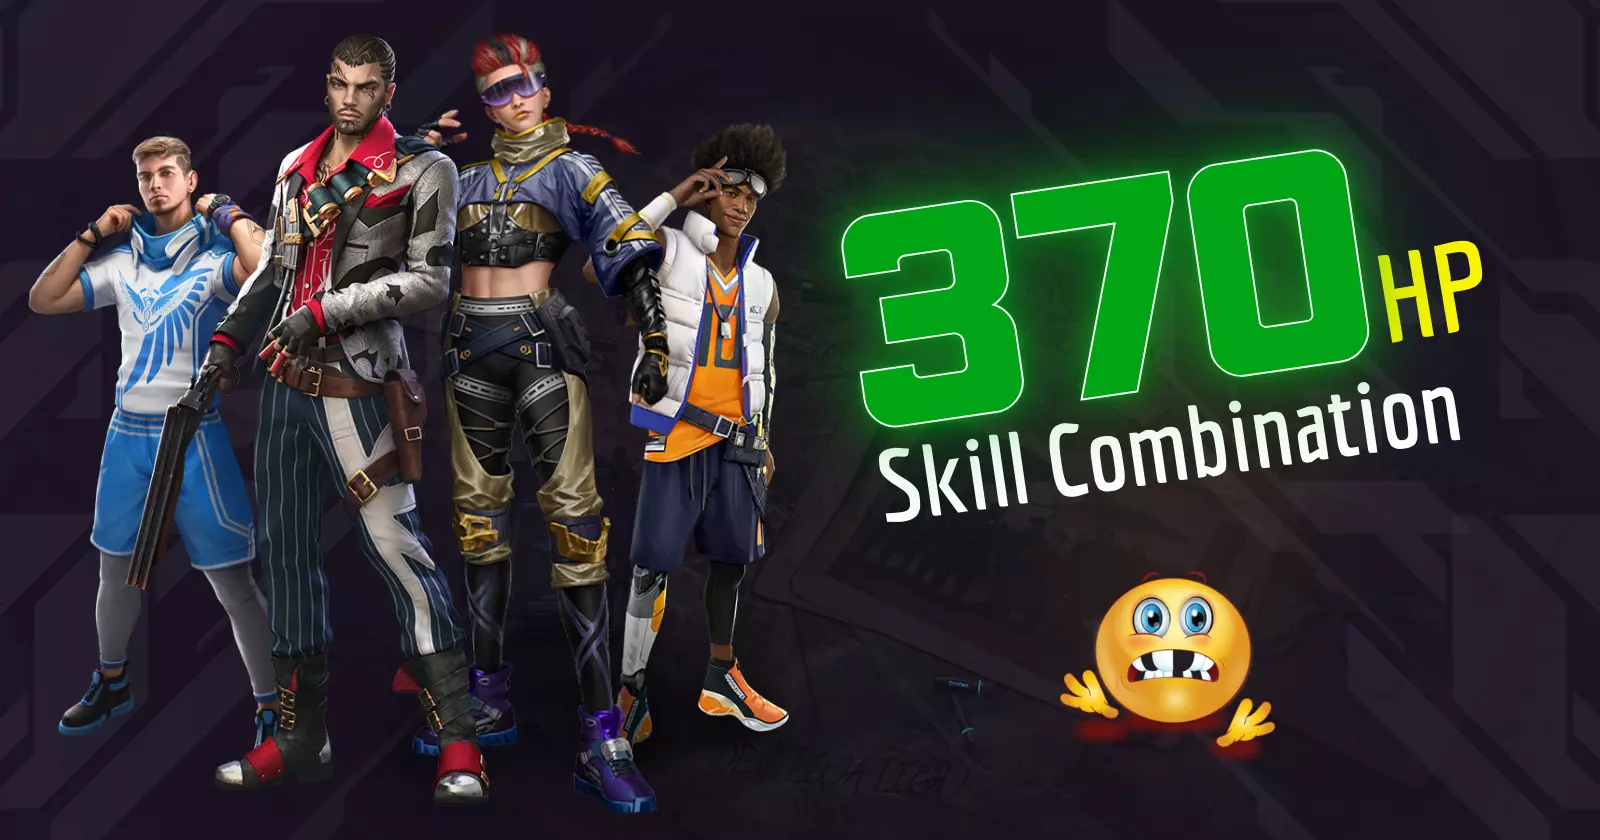 Four characters from a free fire game, showcasing diverse outfits and styles, stand next to the text ‘370 HP Skill Combination’ and a surprised emoji